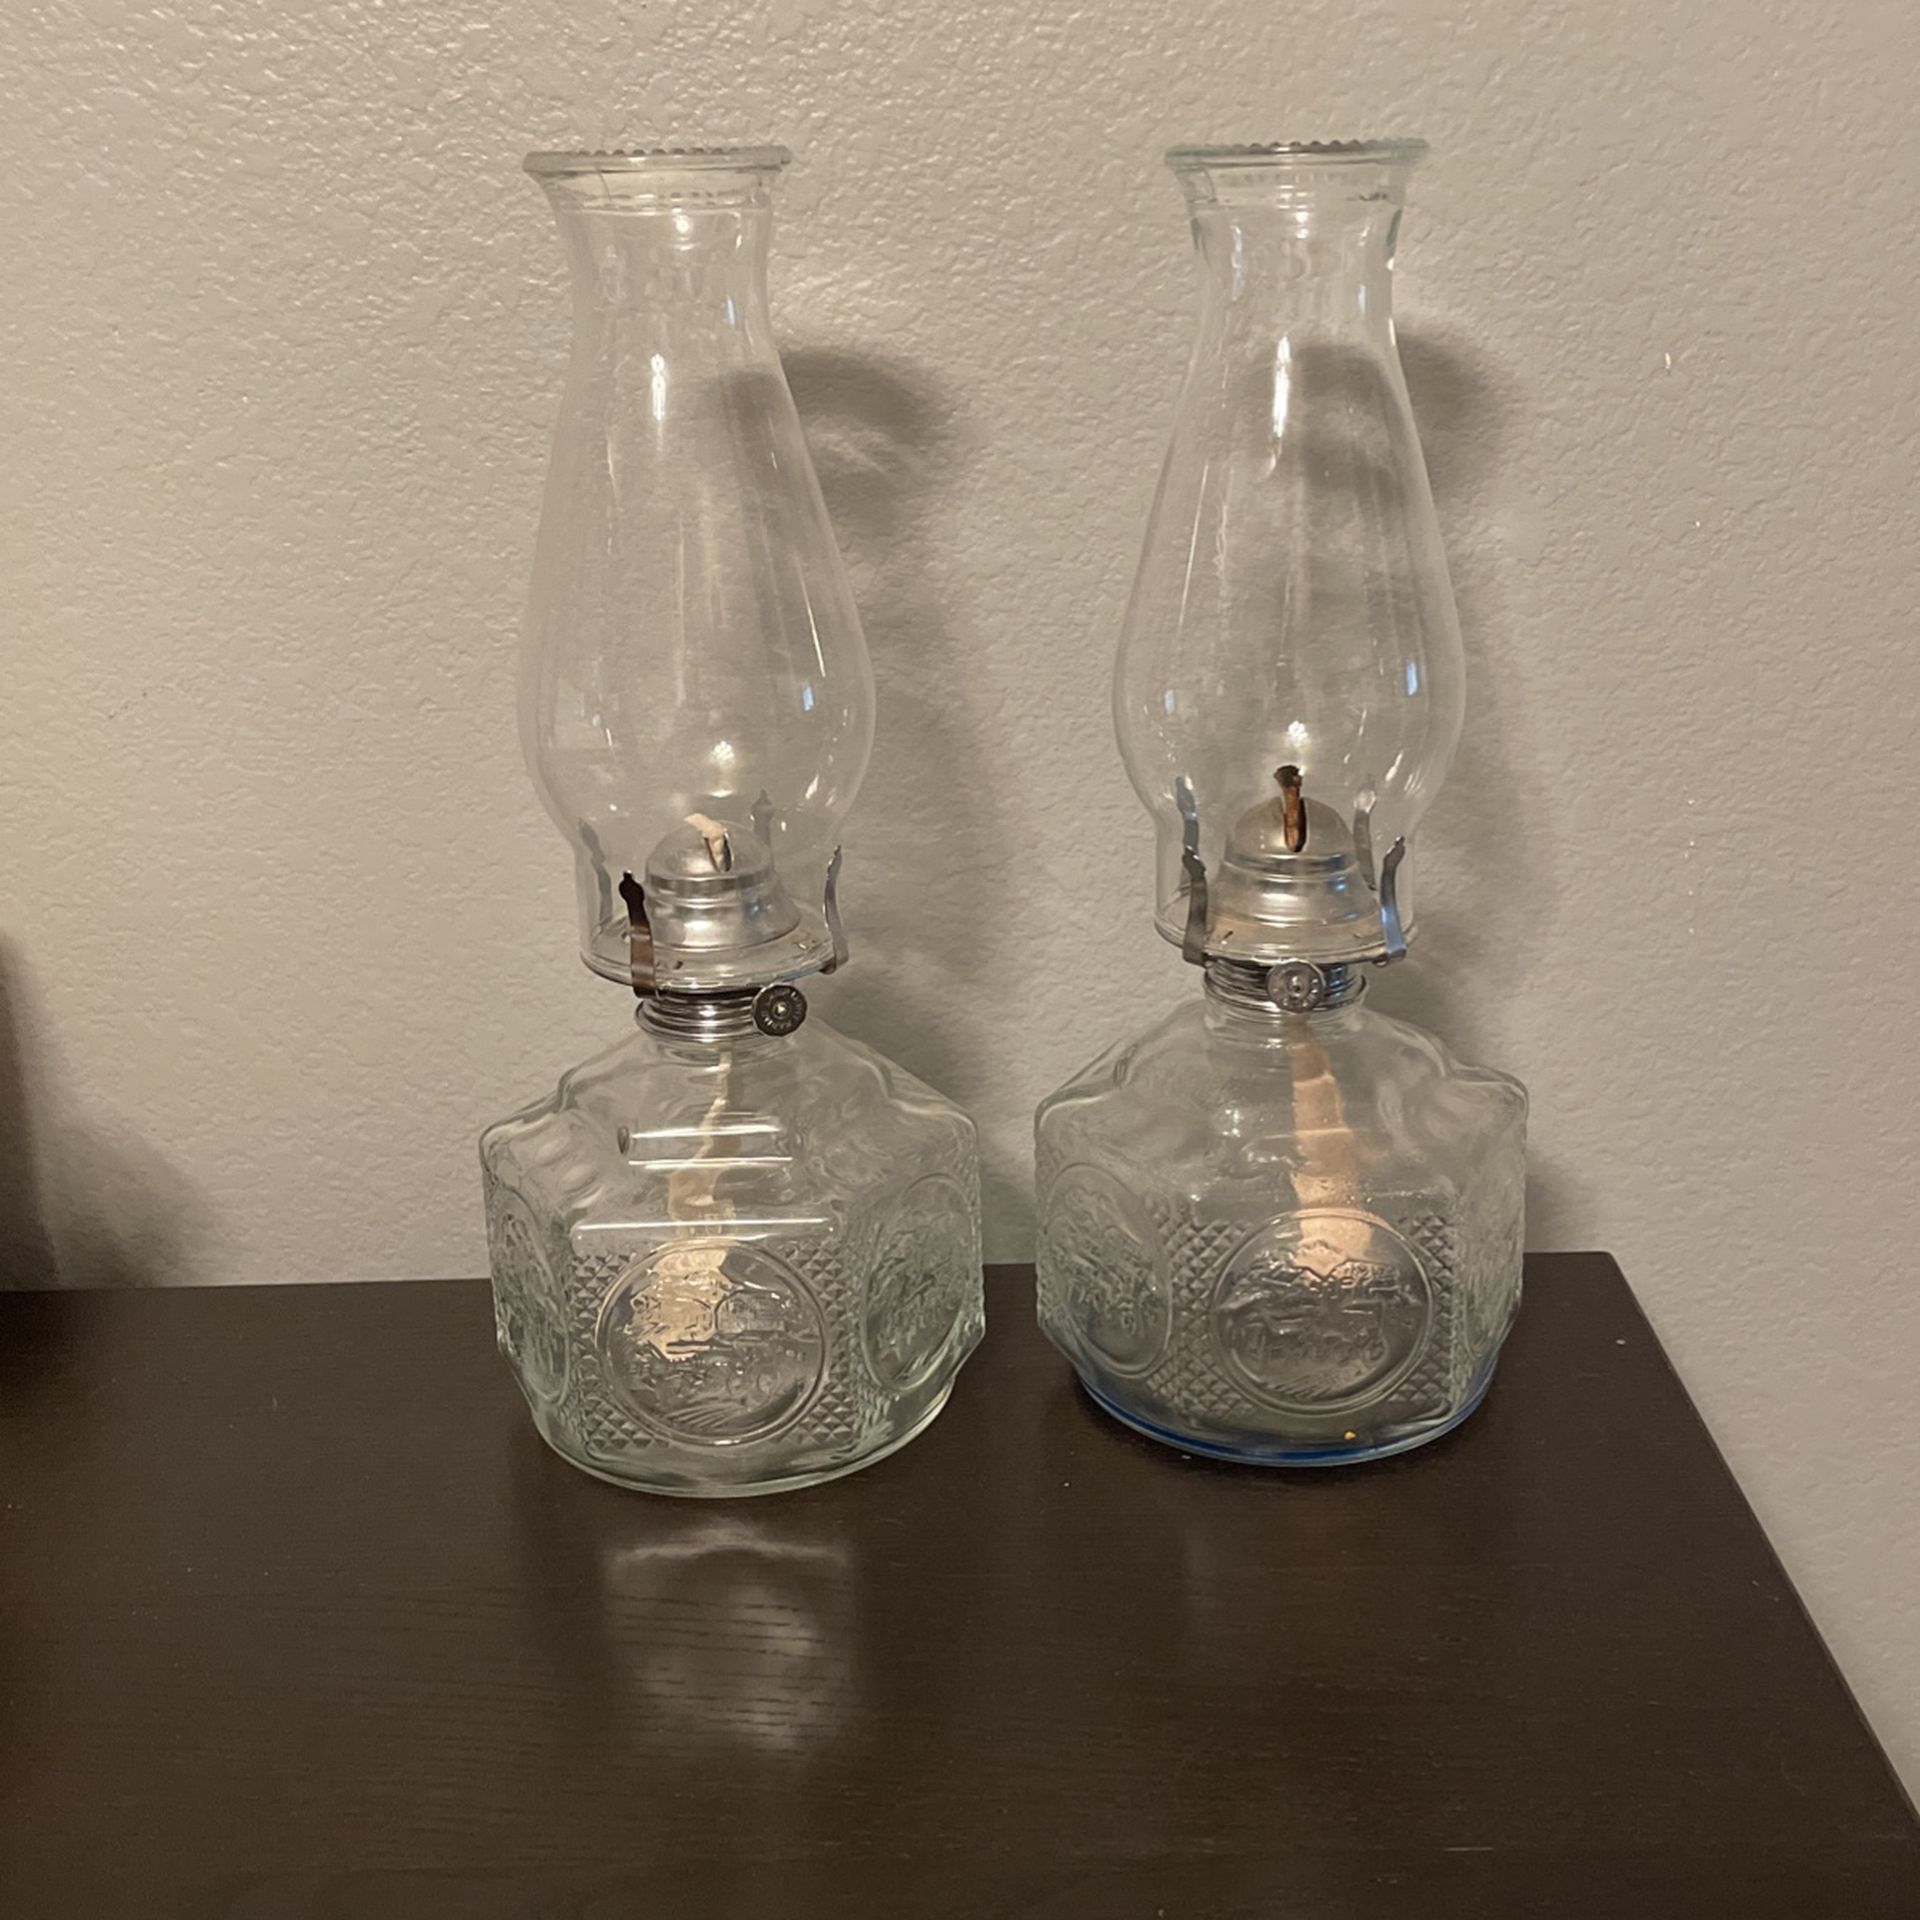 Pair Of Oil Lamps Vintage Lamp Light Farms Horse & Buggy Design